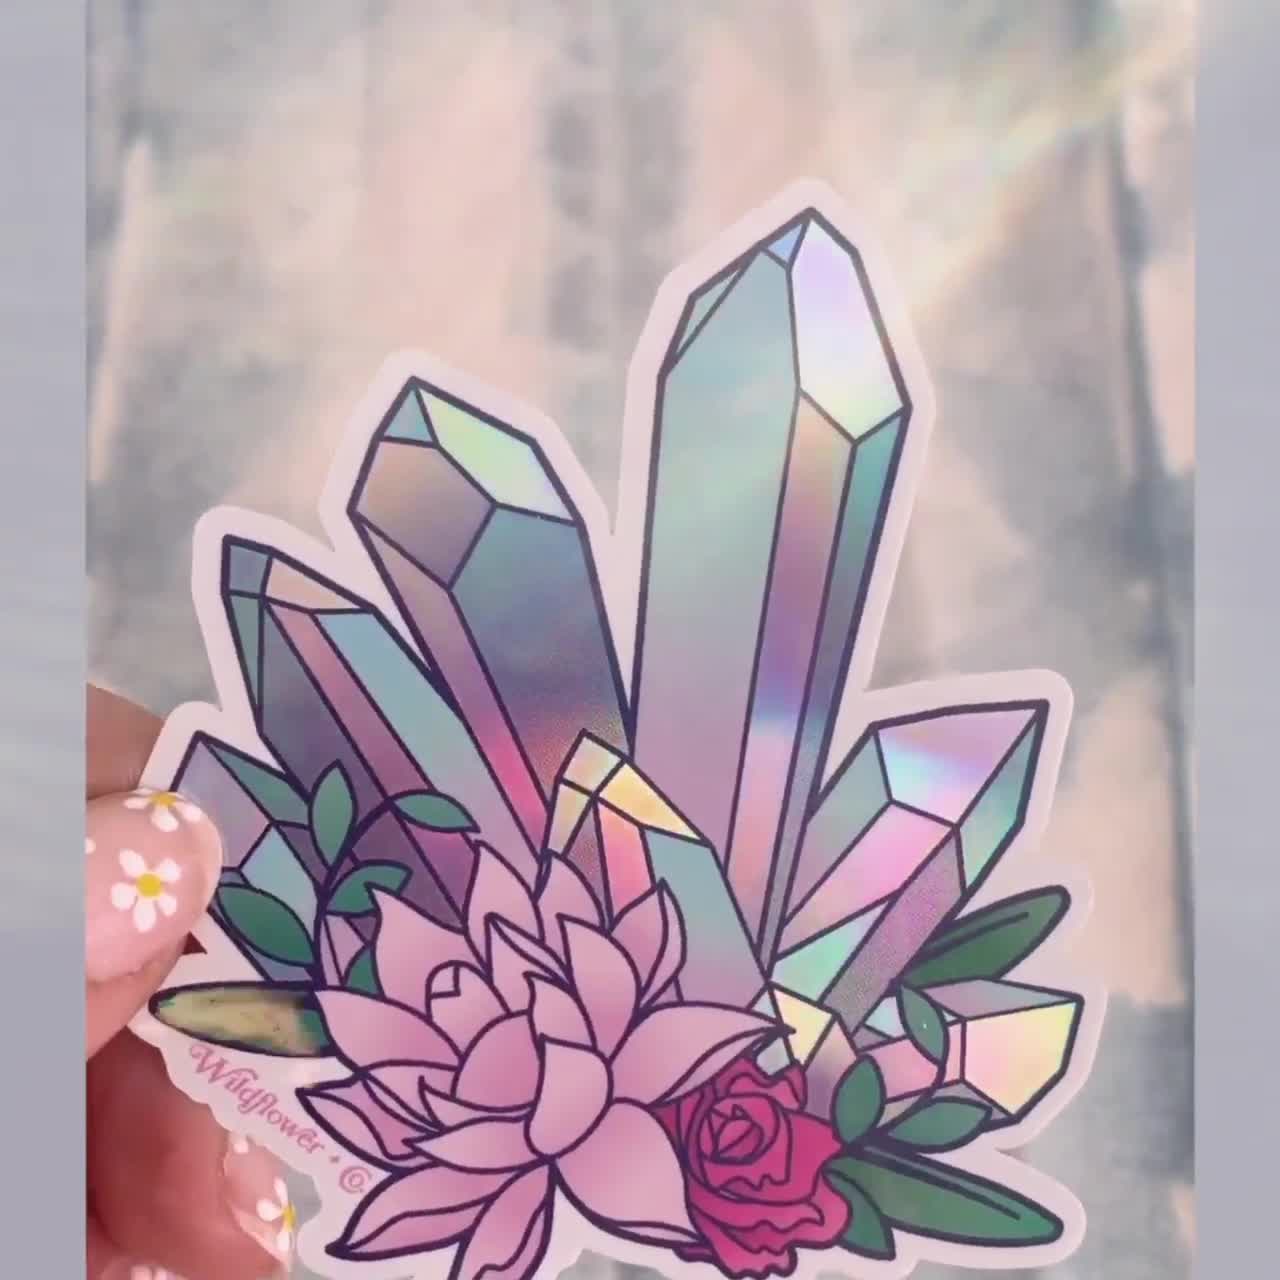 Crystal Sticker Holographic Pastel Aura Crystals & Pink Lotus Stickers for  Laptop Water Bottles Aesthetic Stickers 